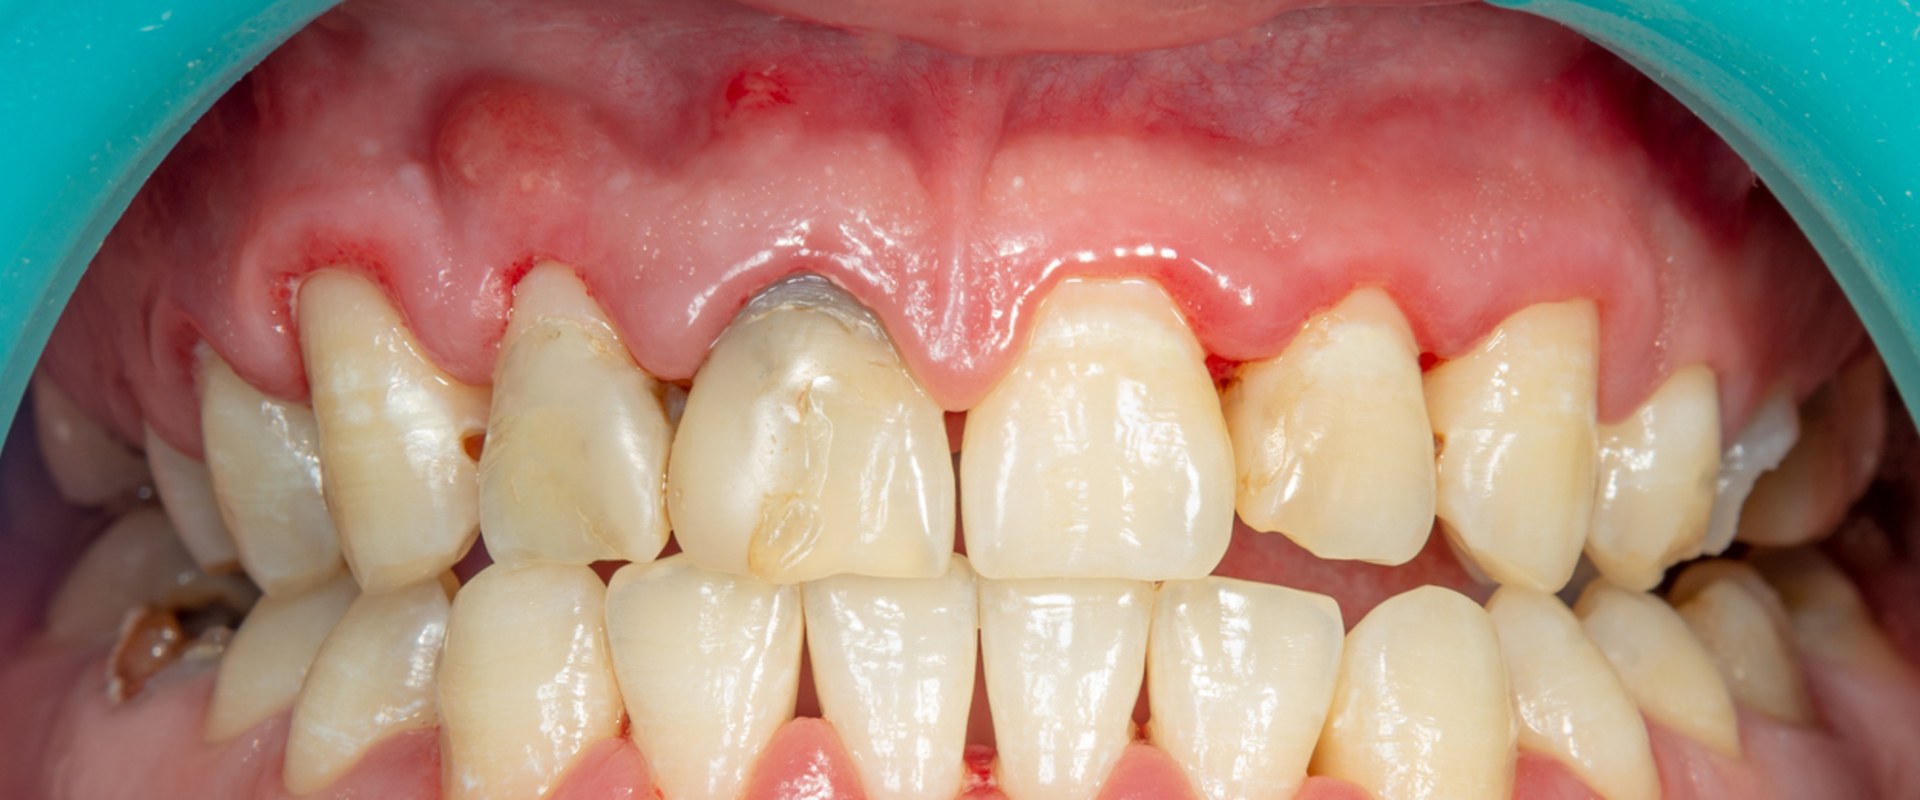 What are the Symptoms of Stage 2 Periodontitis?